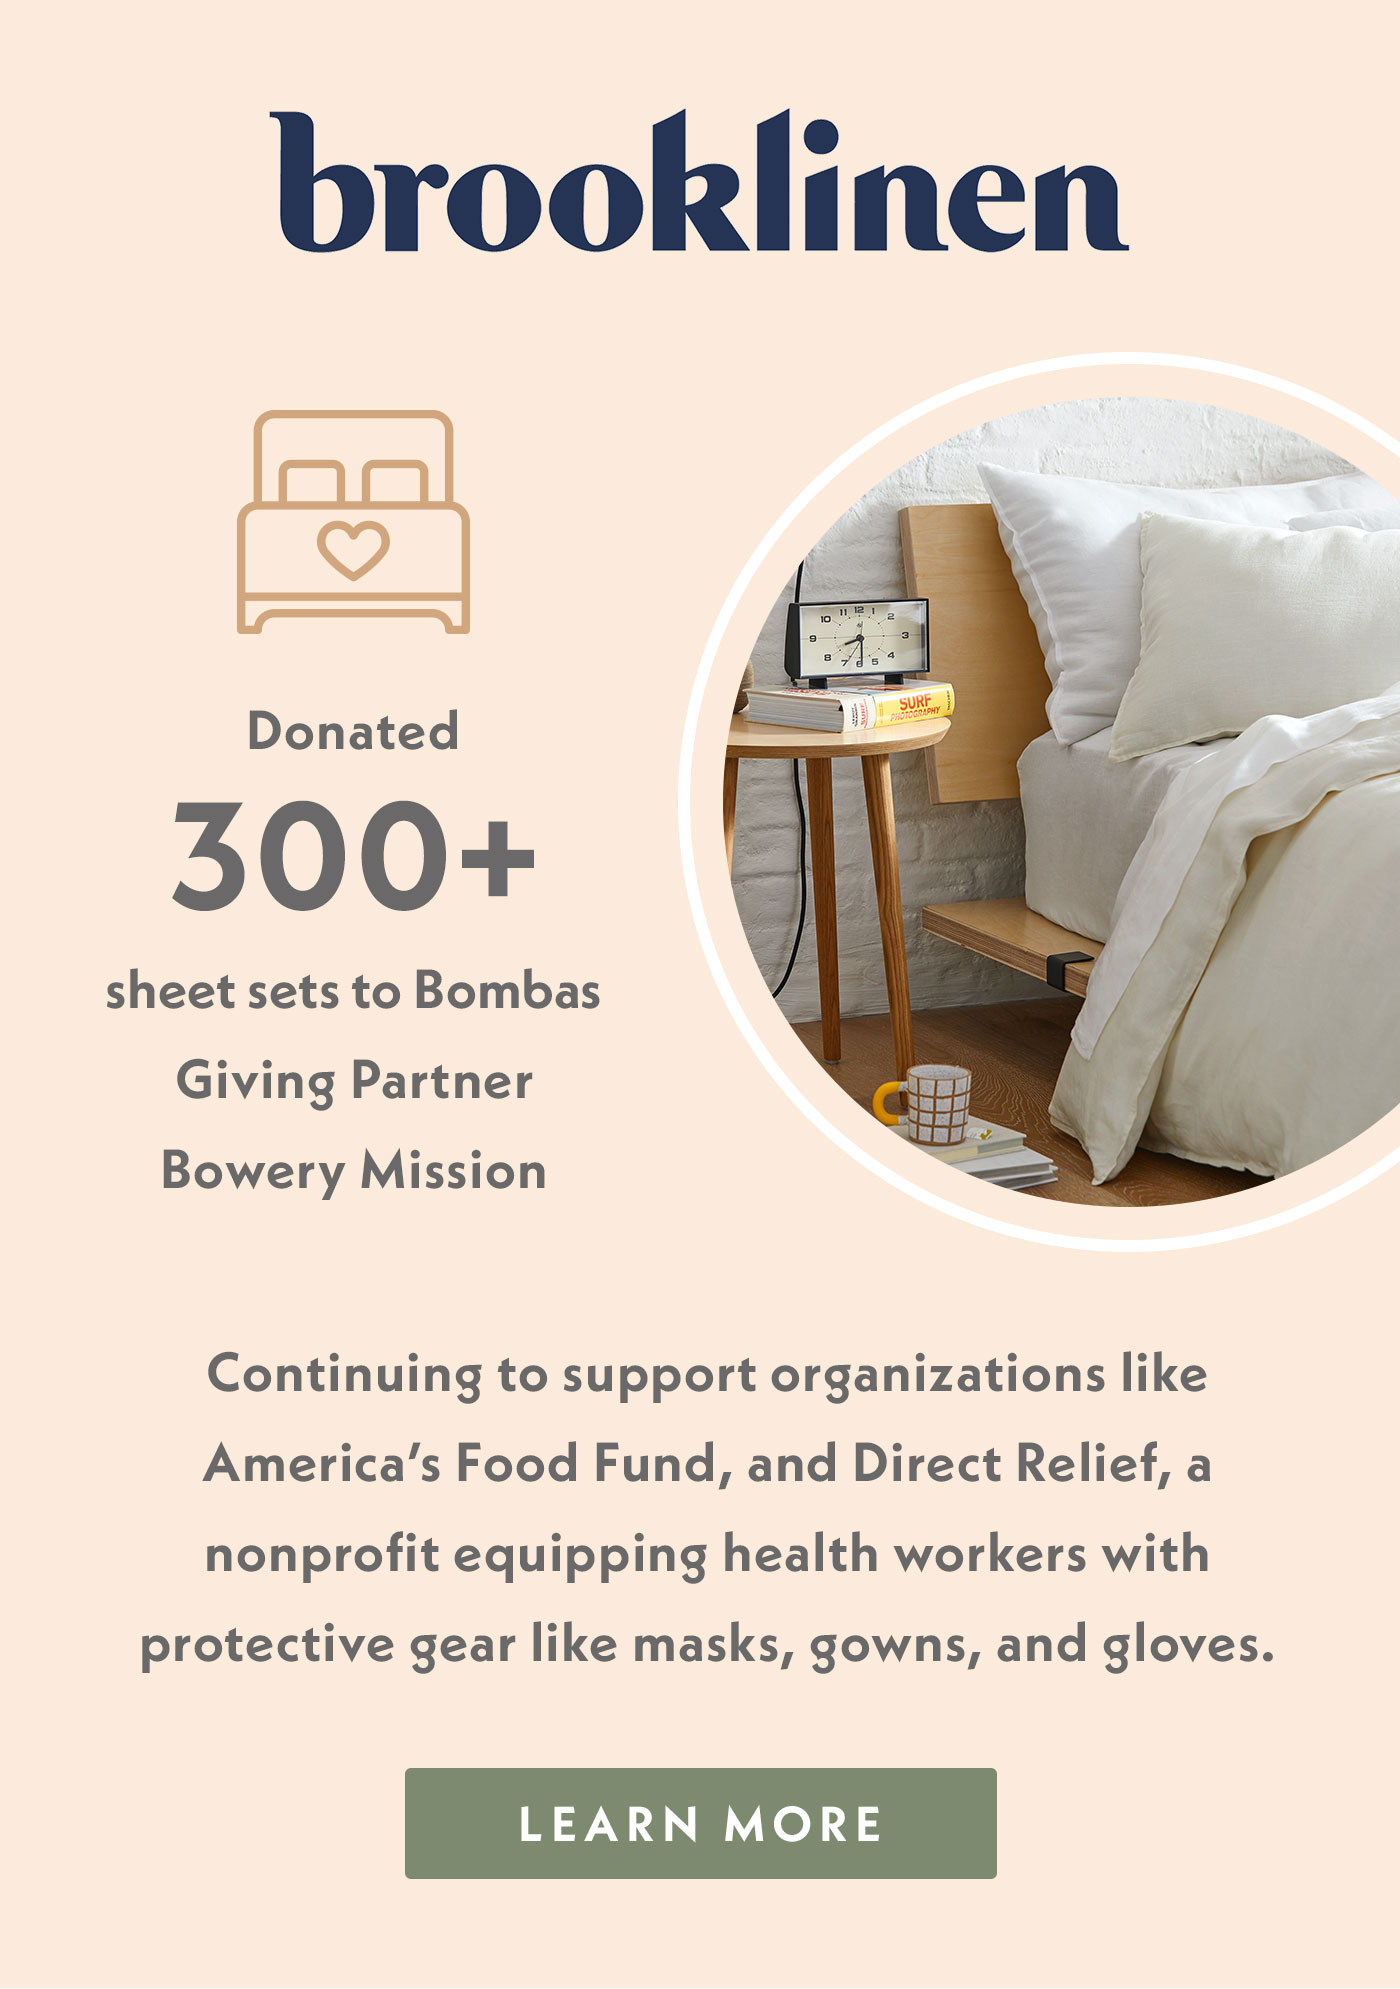 Brooklinen has donated 300+ sheet sets to Bombas Giving Partner Bowery Mission. They are continuing to support organizations like America's Food Fund, and Direct Relief, a nonprofit equipping health workers with protective gear like masks, gowns, and gloves.